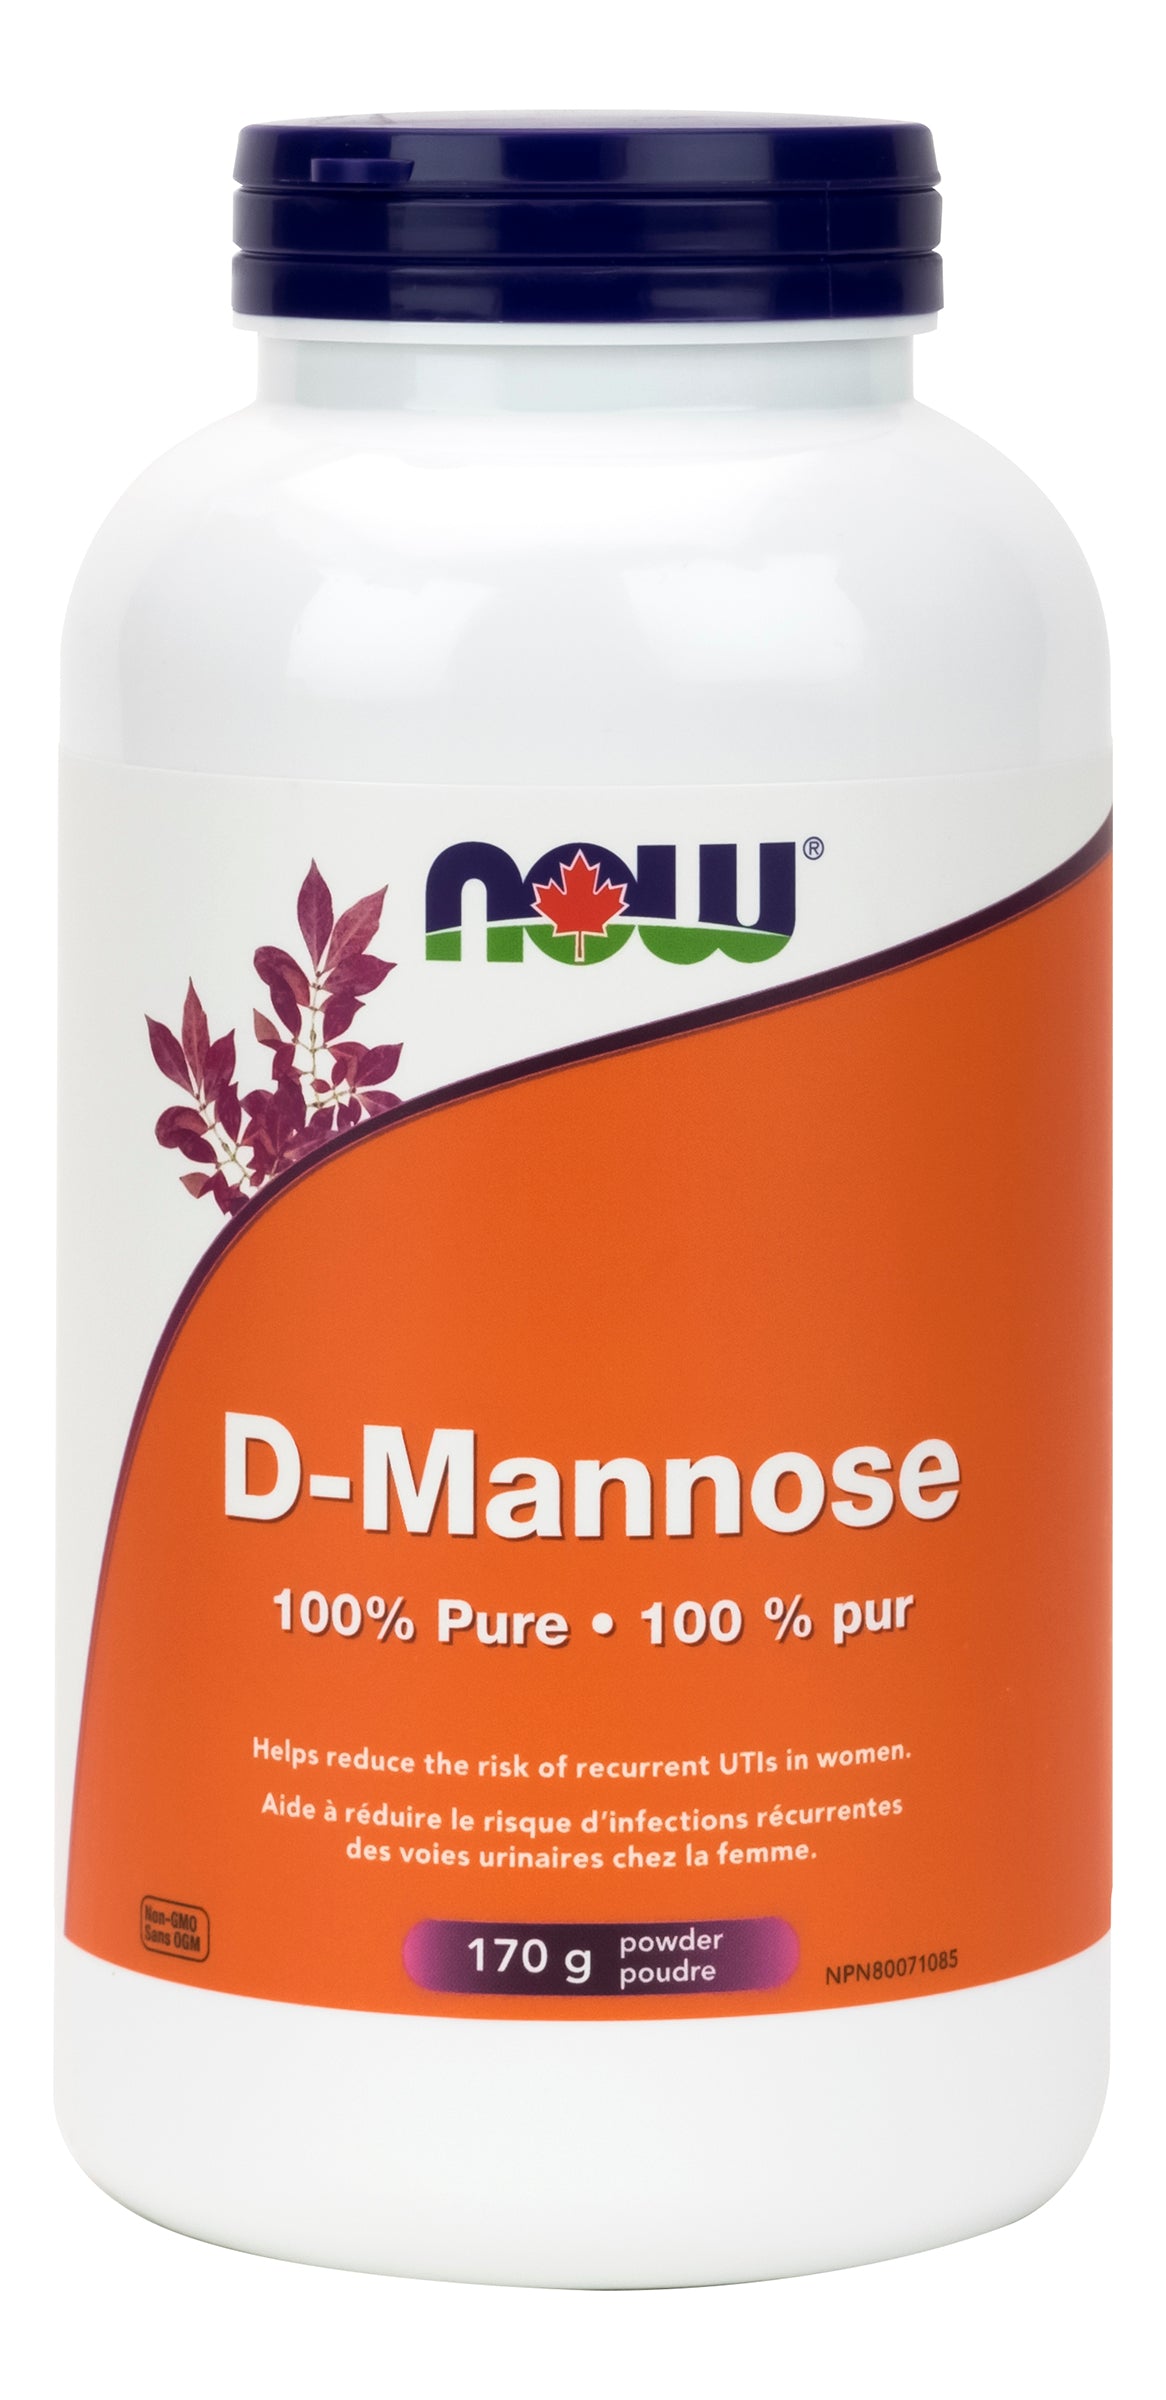 NOW D-Mannose 100% Pure Powder 170g